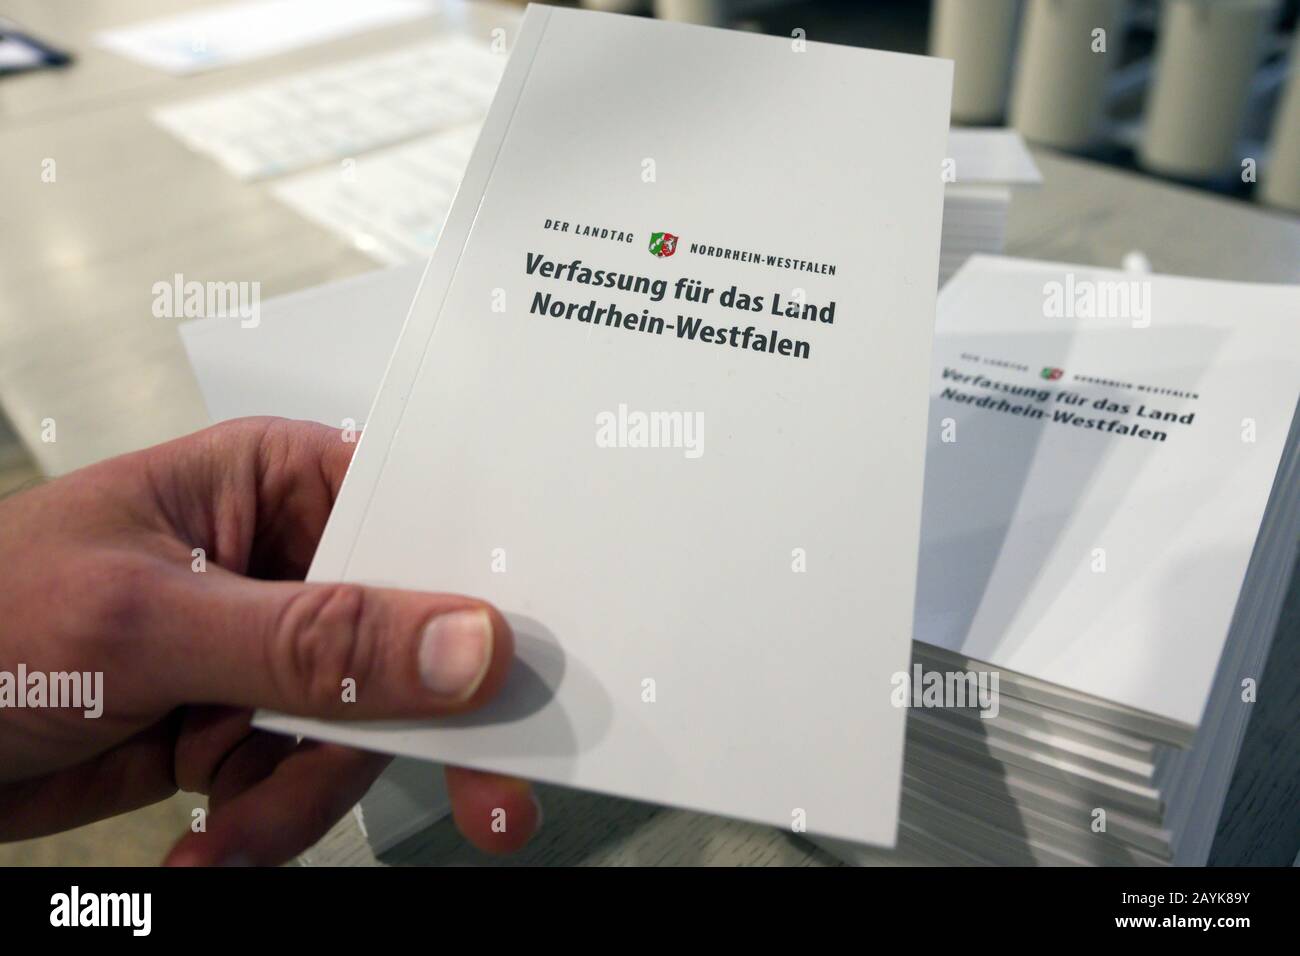 14 February 2020, North Rhine-Westphalia, Duesseldorf: A member of the state parliament holds a state constitution up to the camera. A pocket book with symbolic value: This year, the North Rhine-Westphalian state parliament will give all pupils who visit the parliament a compact edition of the state constitution. Around 35,000 young people visit the Landtag every year. According to a speaker of the state parliament, the occasion for the action is the 70th anniversary of the constitution. (to dpa: 'State parliament wants to distribute state constitutions to 35 000 pupils') Photo: Federico Gamba Stock Photo